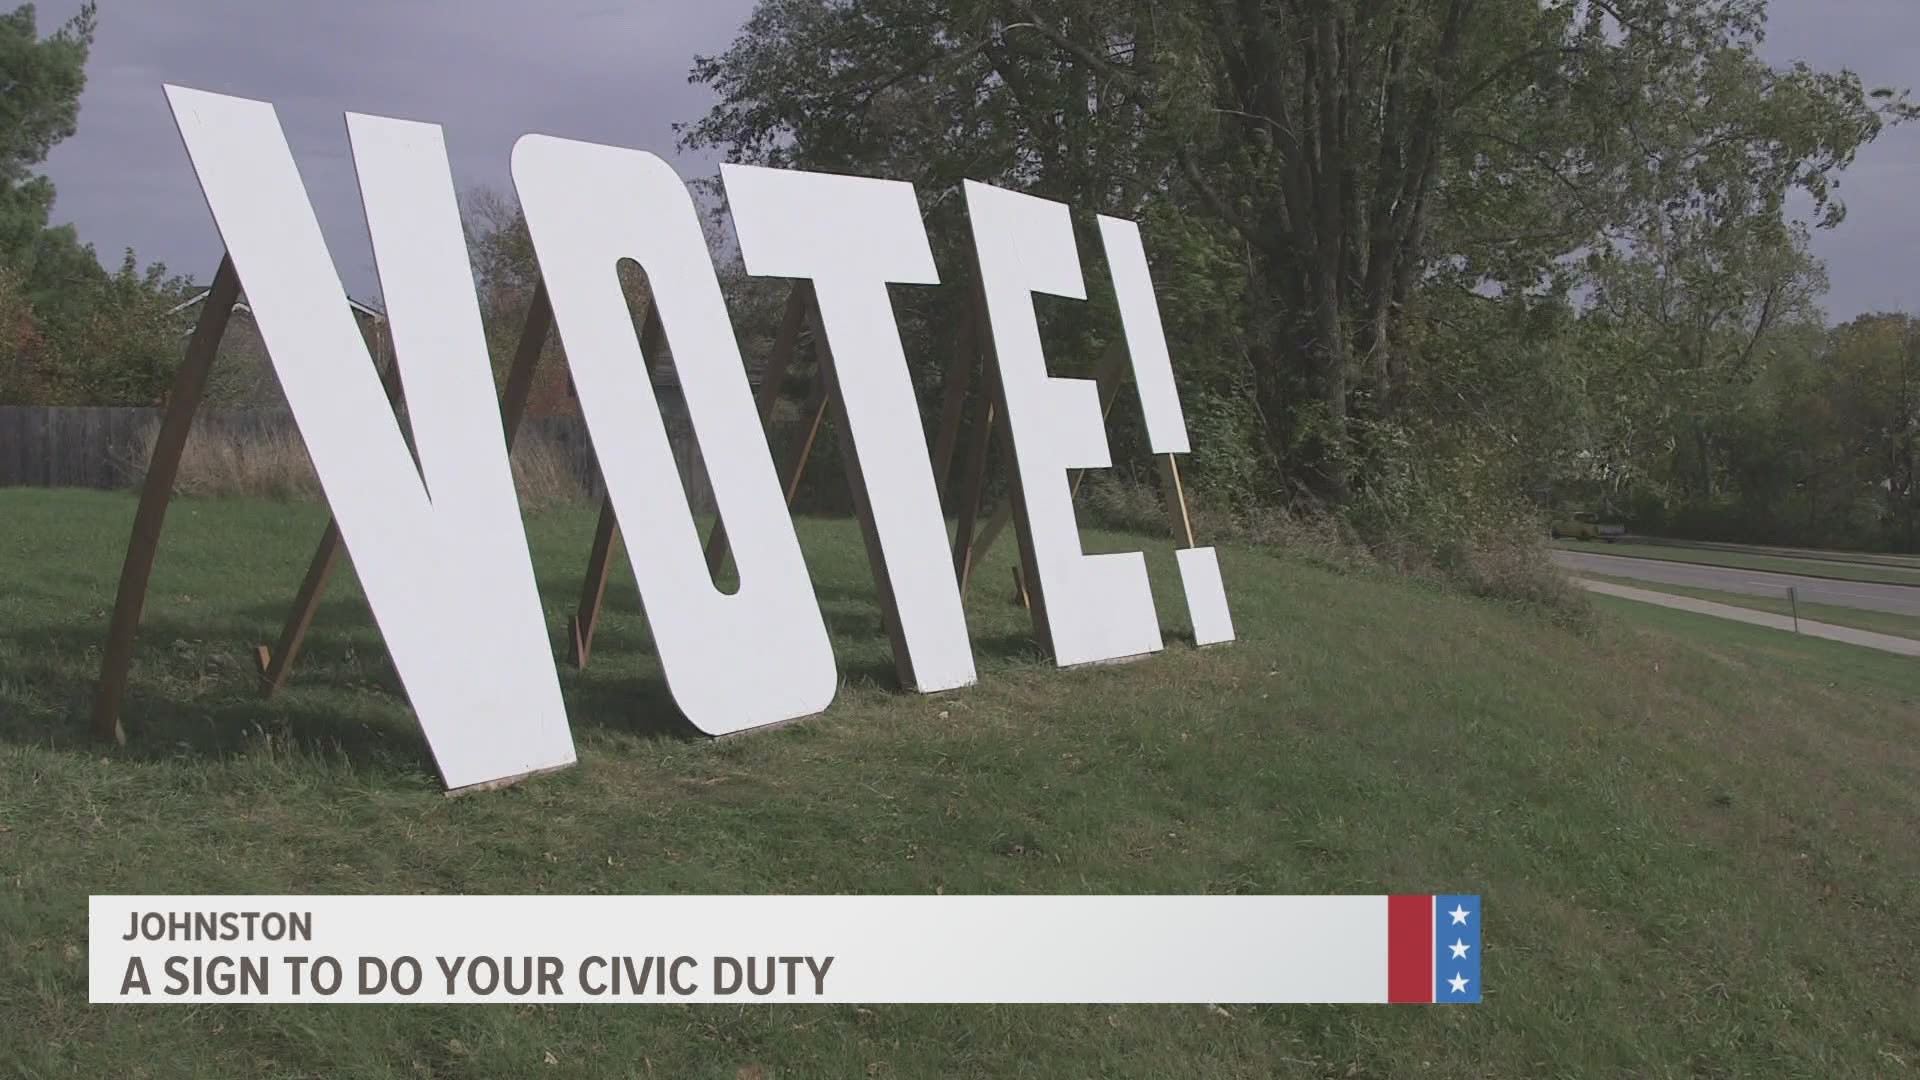 The sign's builder says the sign is up to encourage everyone to vote regardless of party; as a result, no political signs are allowed next to it.